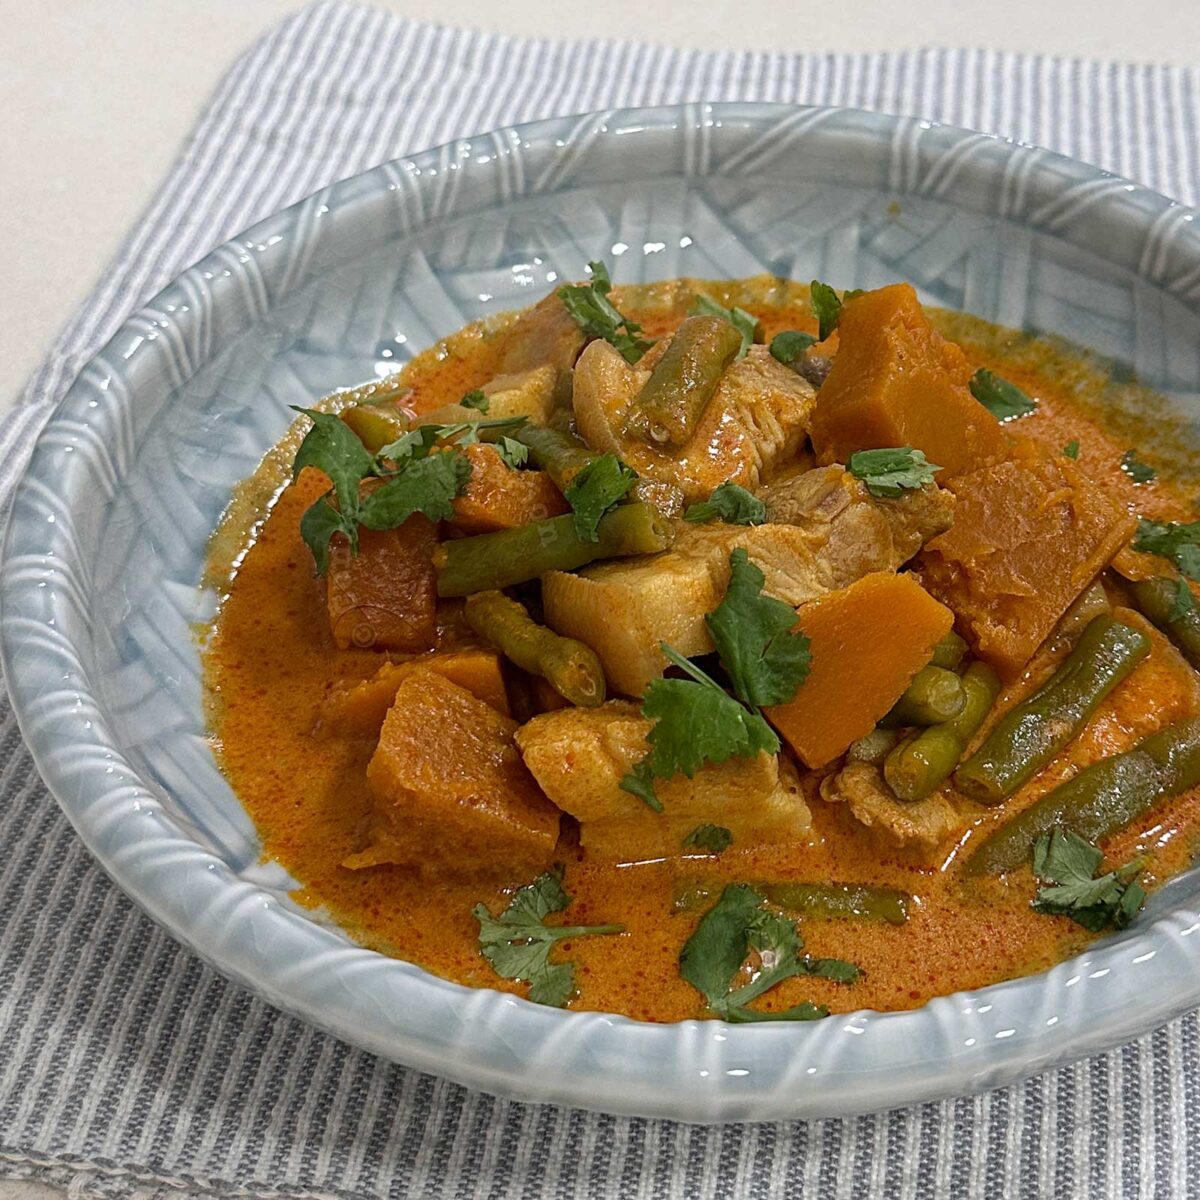 Phuketian heritage curry with pork and vegetables